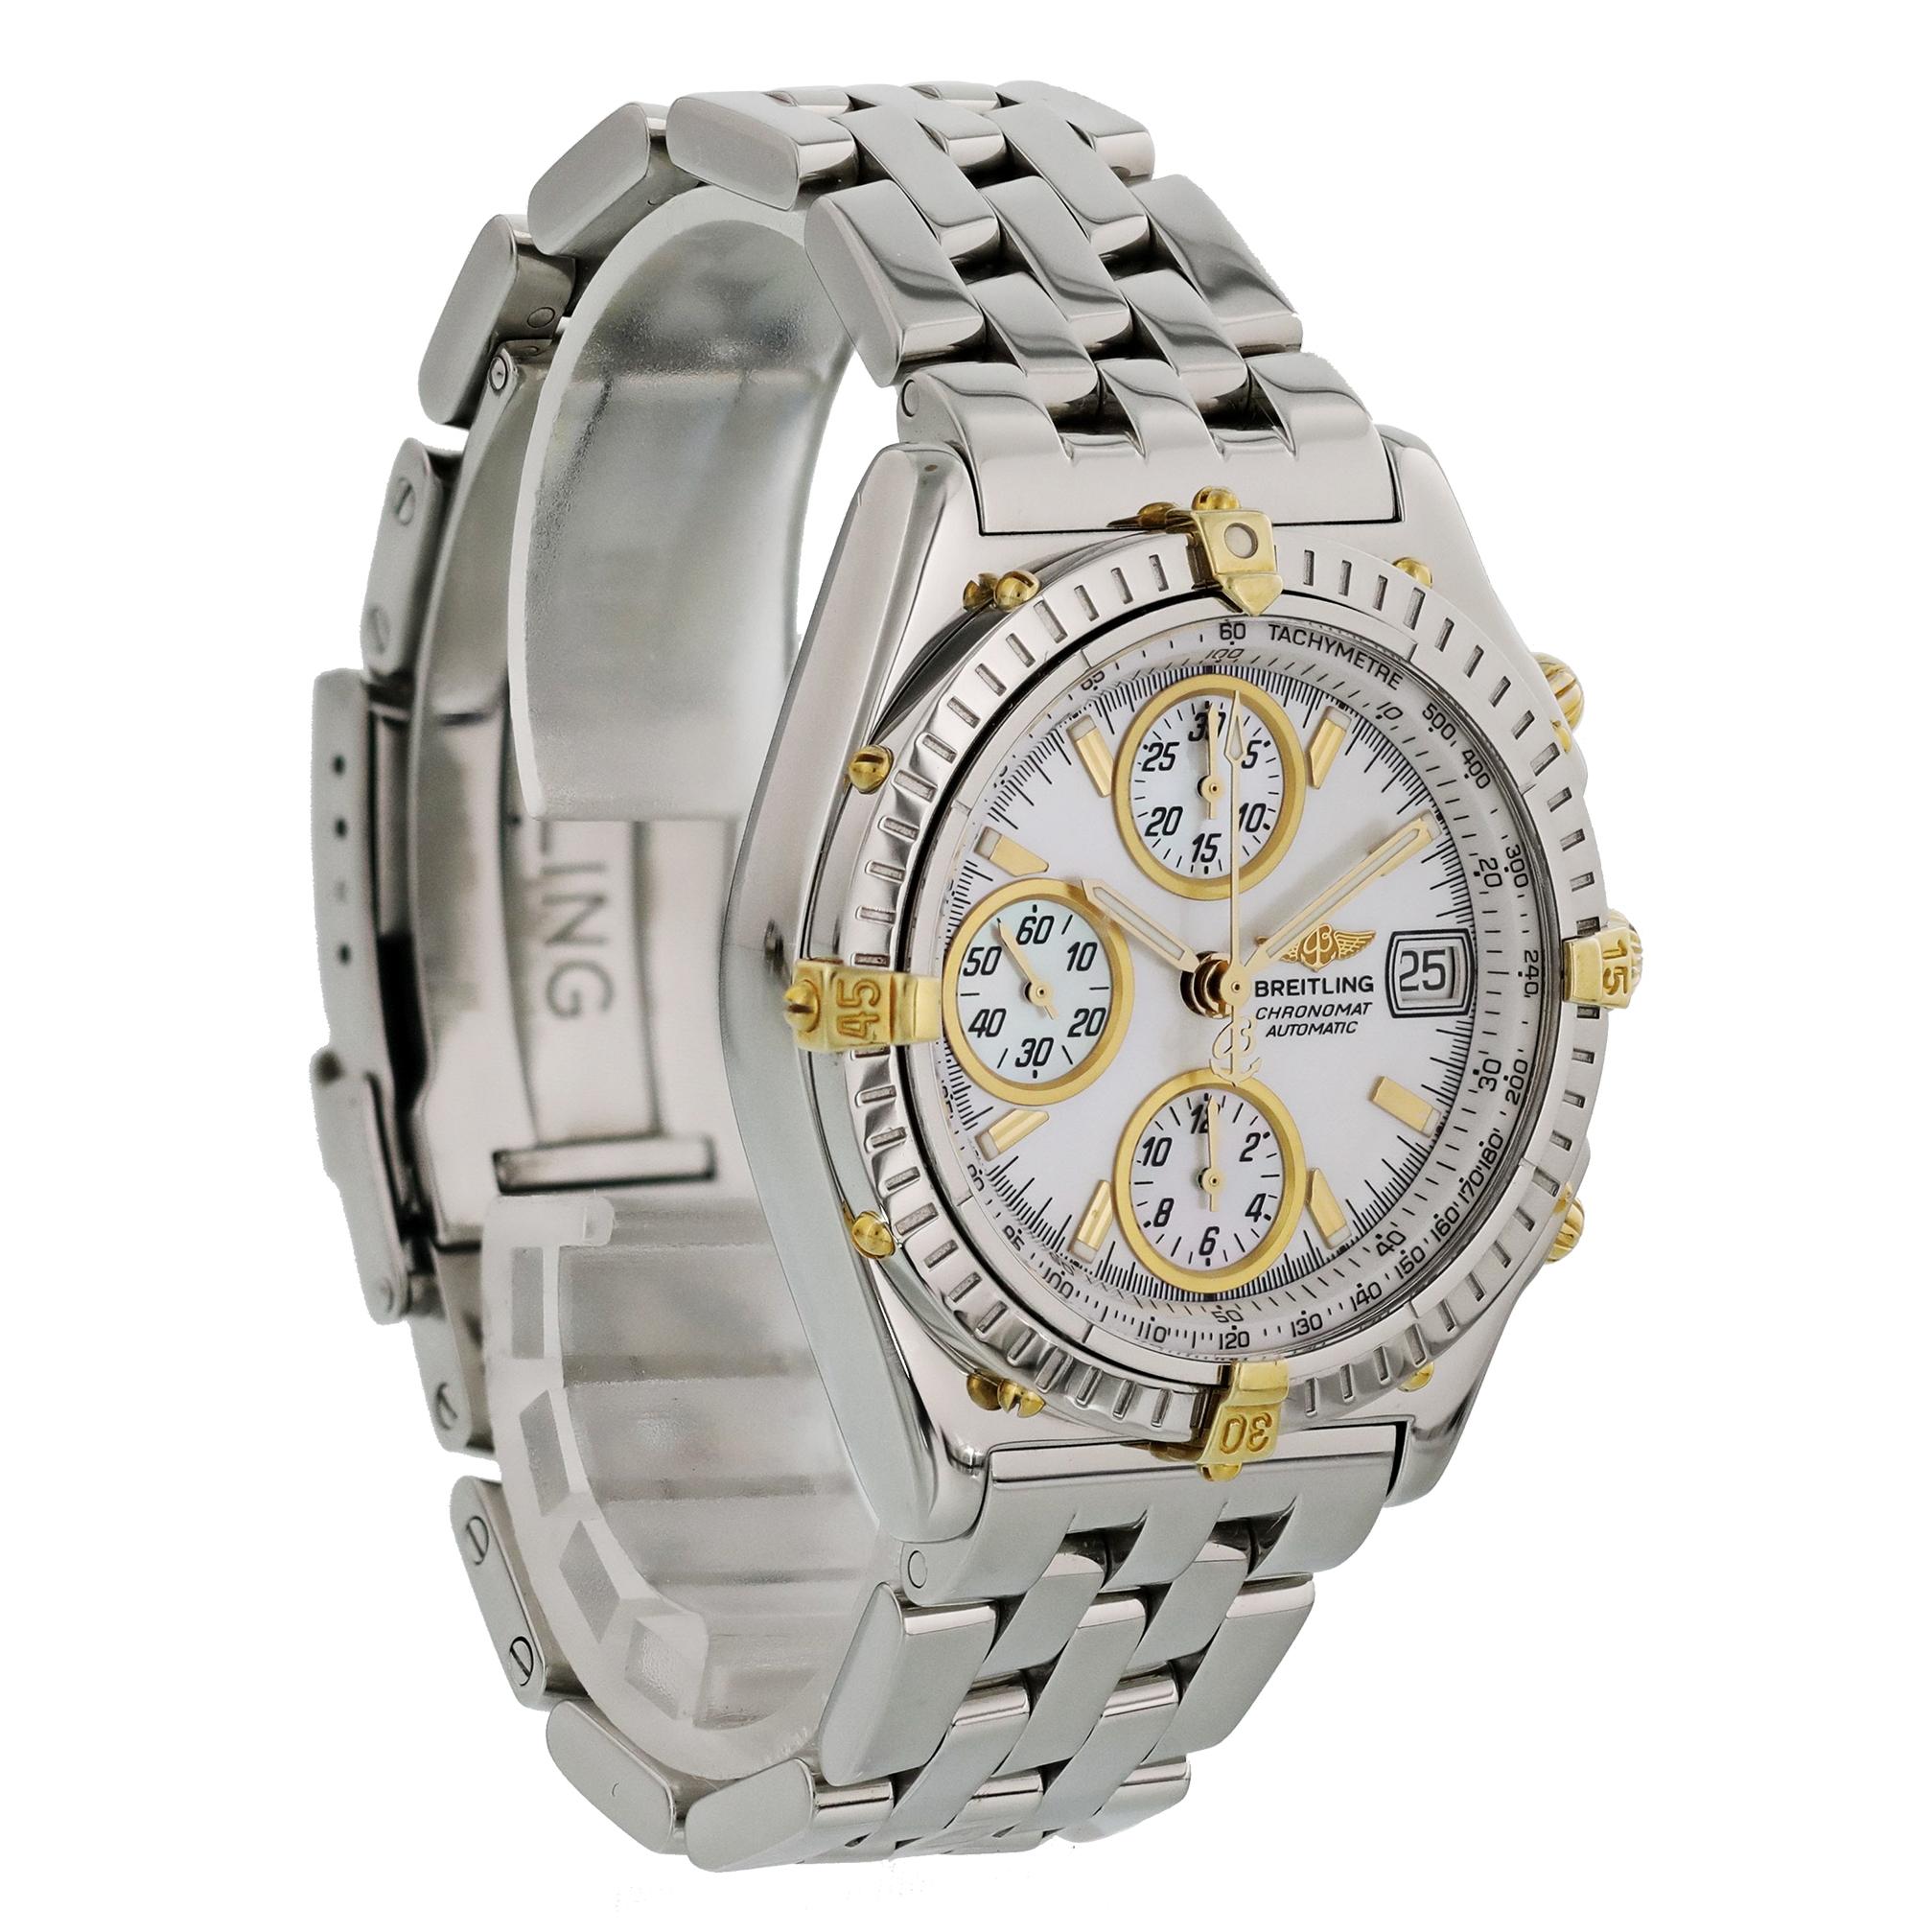 Breitling Chronomat B13050.1 Mother of Pearl Dial Men's Watch In Excellent Condition For Sale In New York, NY